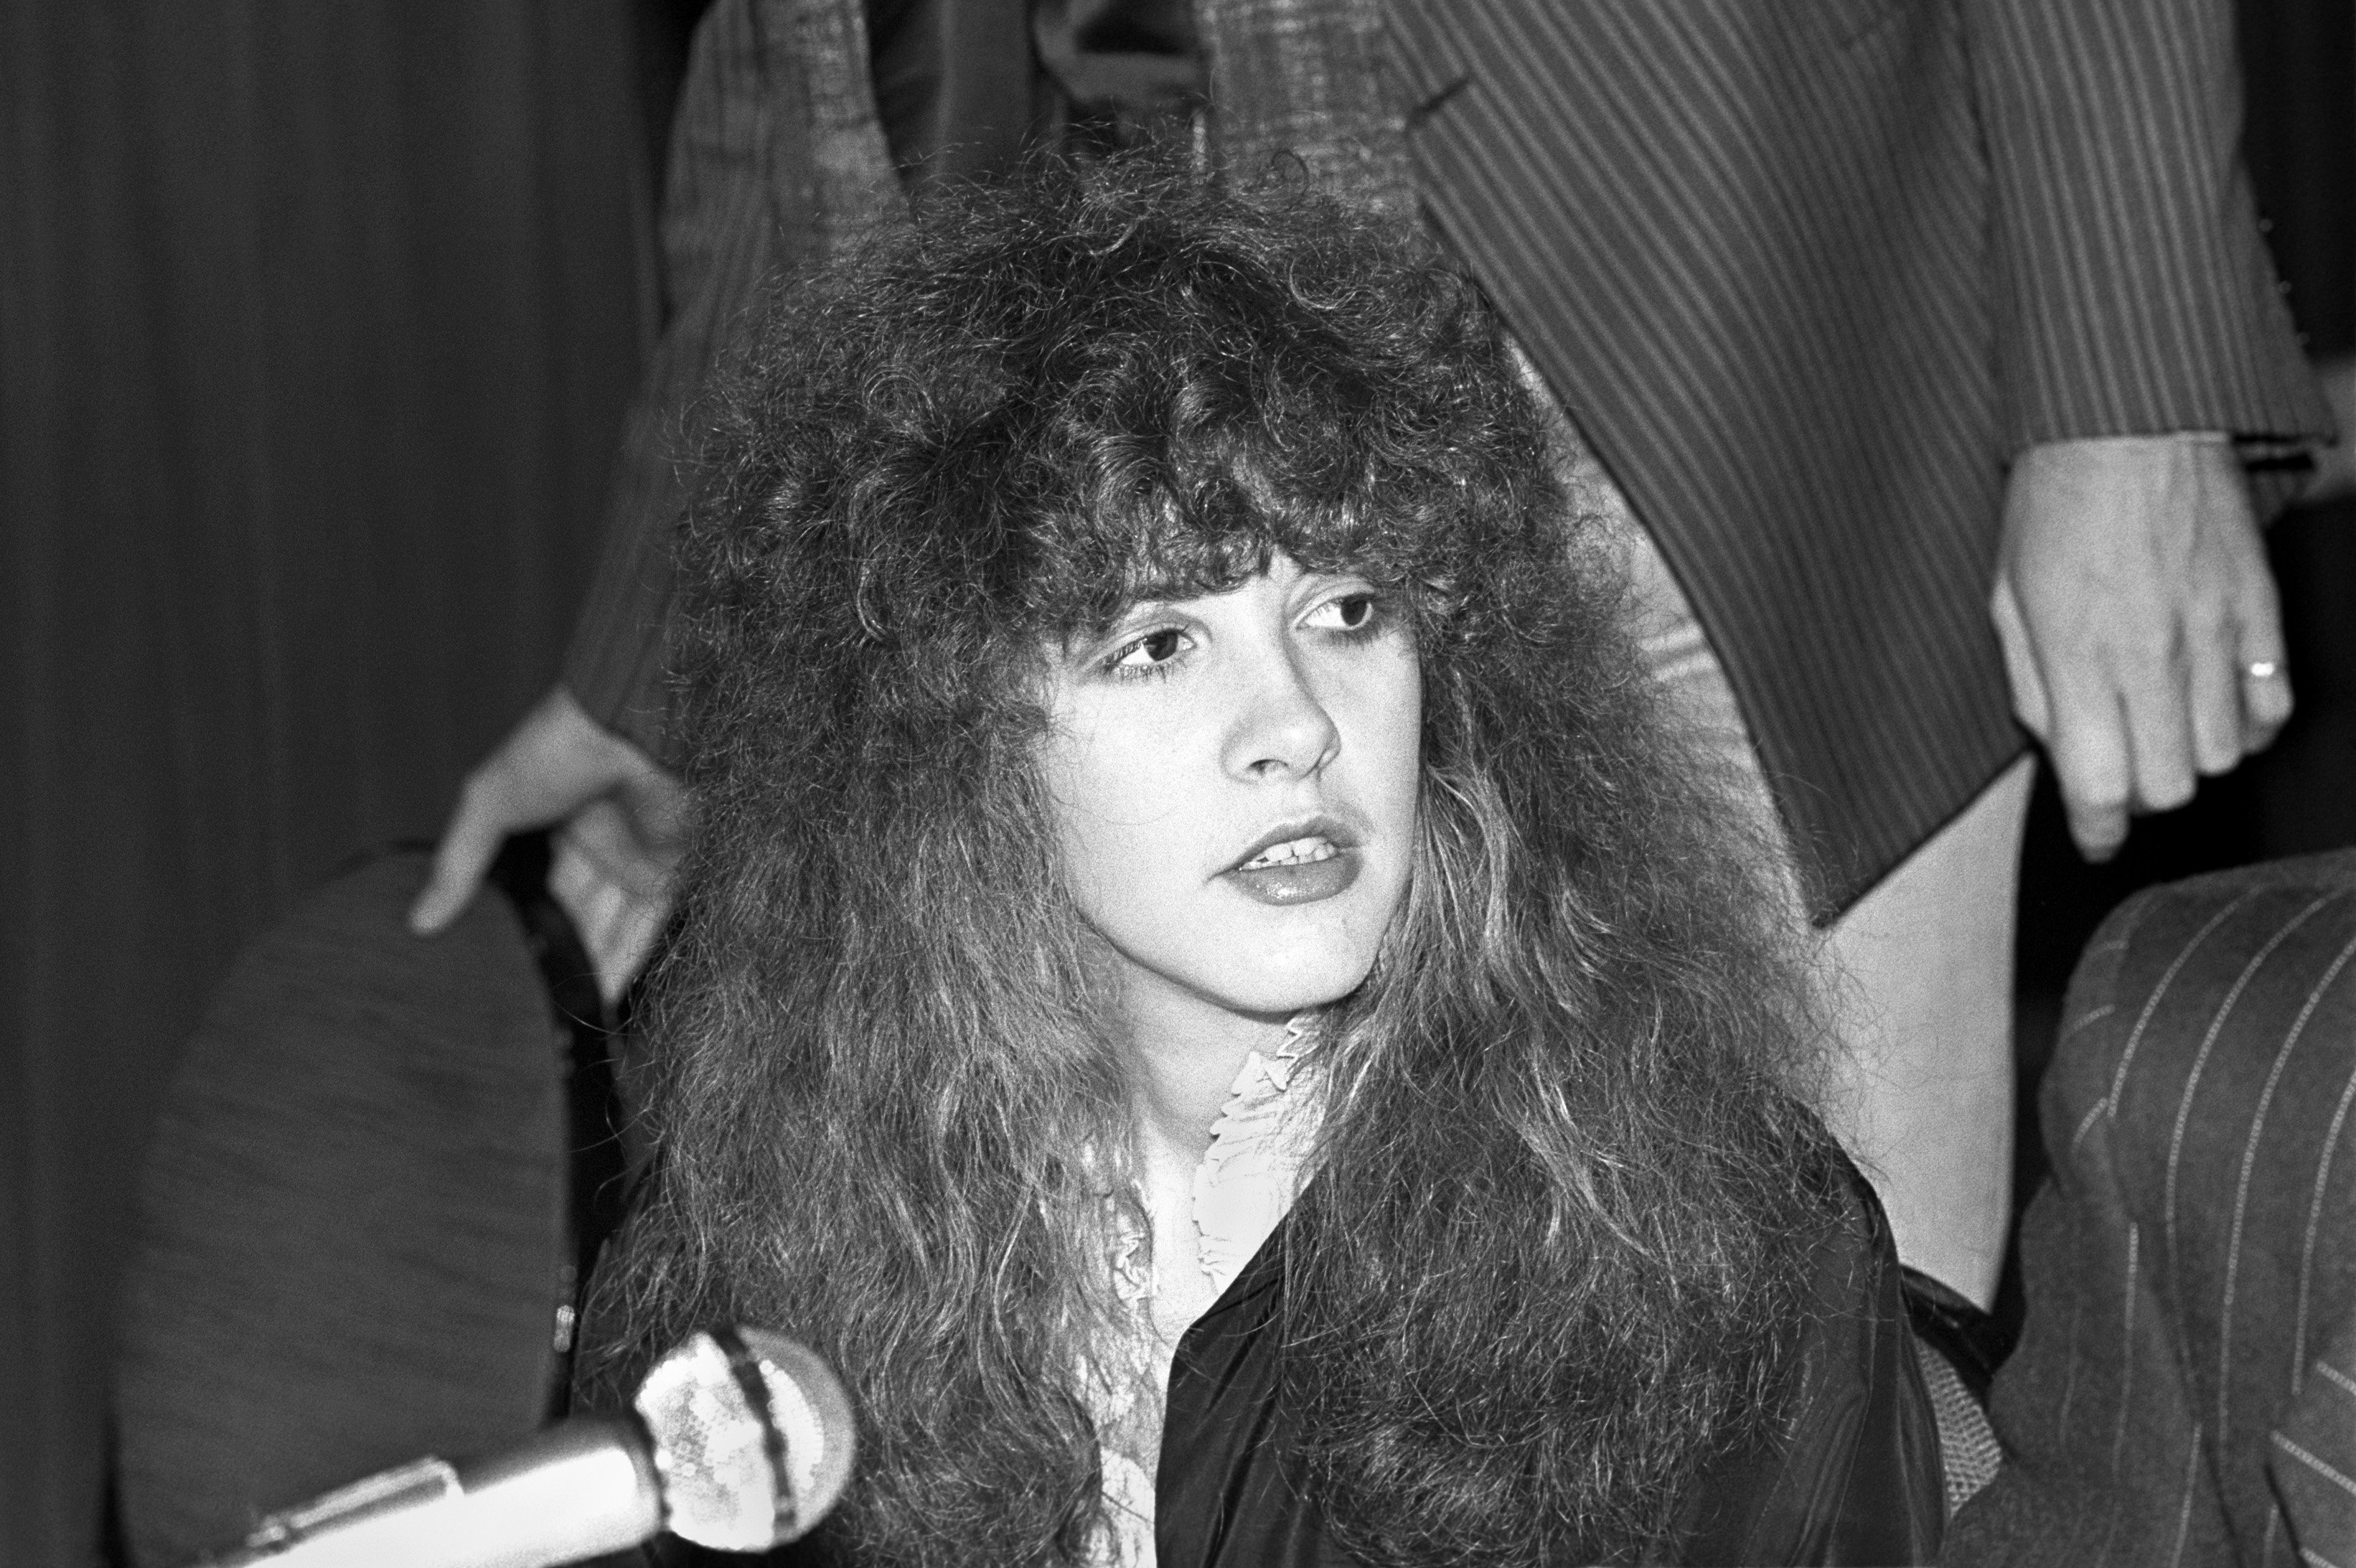 A black and white photo of Stevie Nicks wearing a black jacket and white shirt and sitting in front of a microphone.